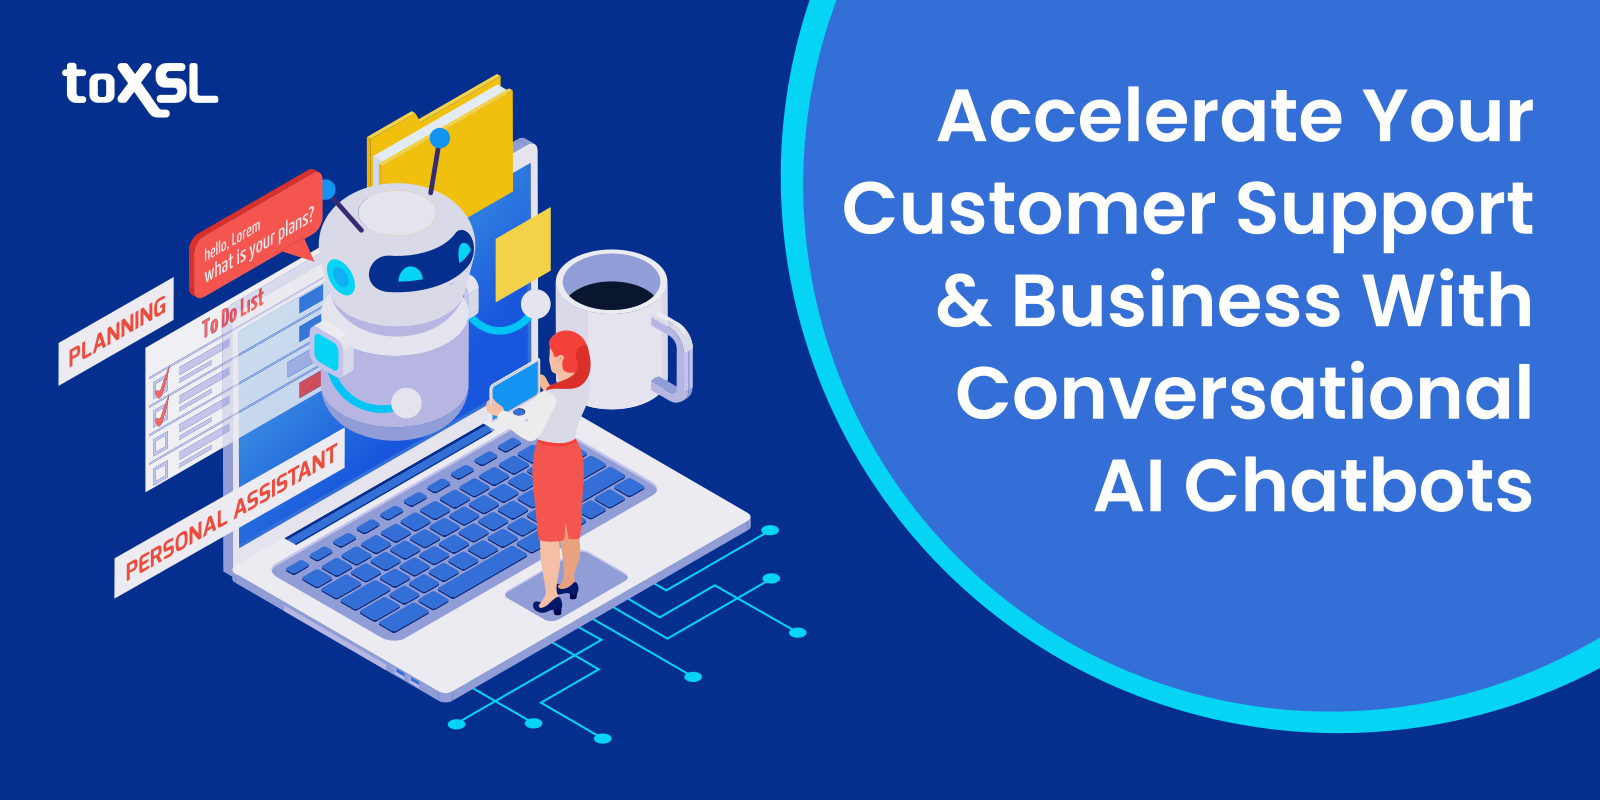 Accelerate Your Customer Support And Business With Conversational AI Chatbots